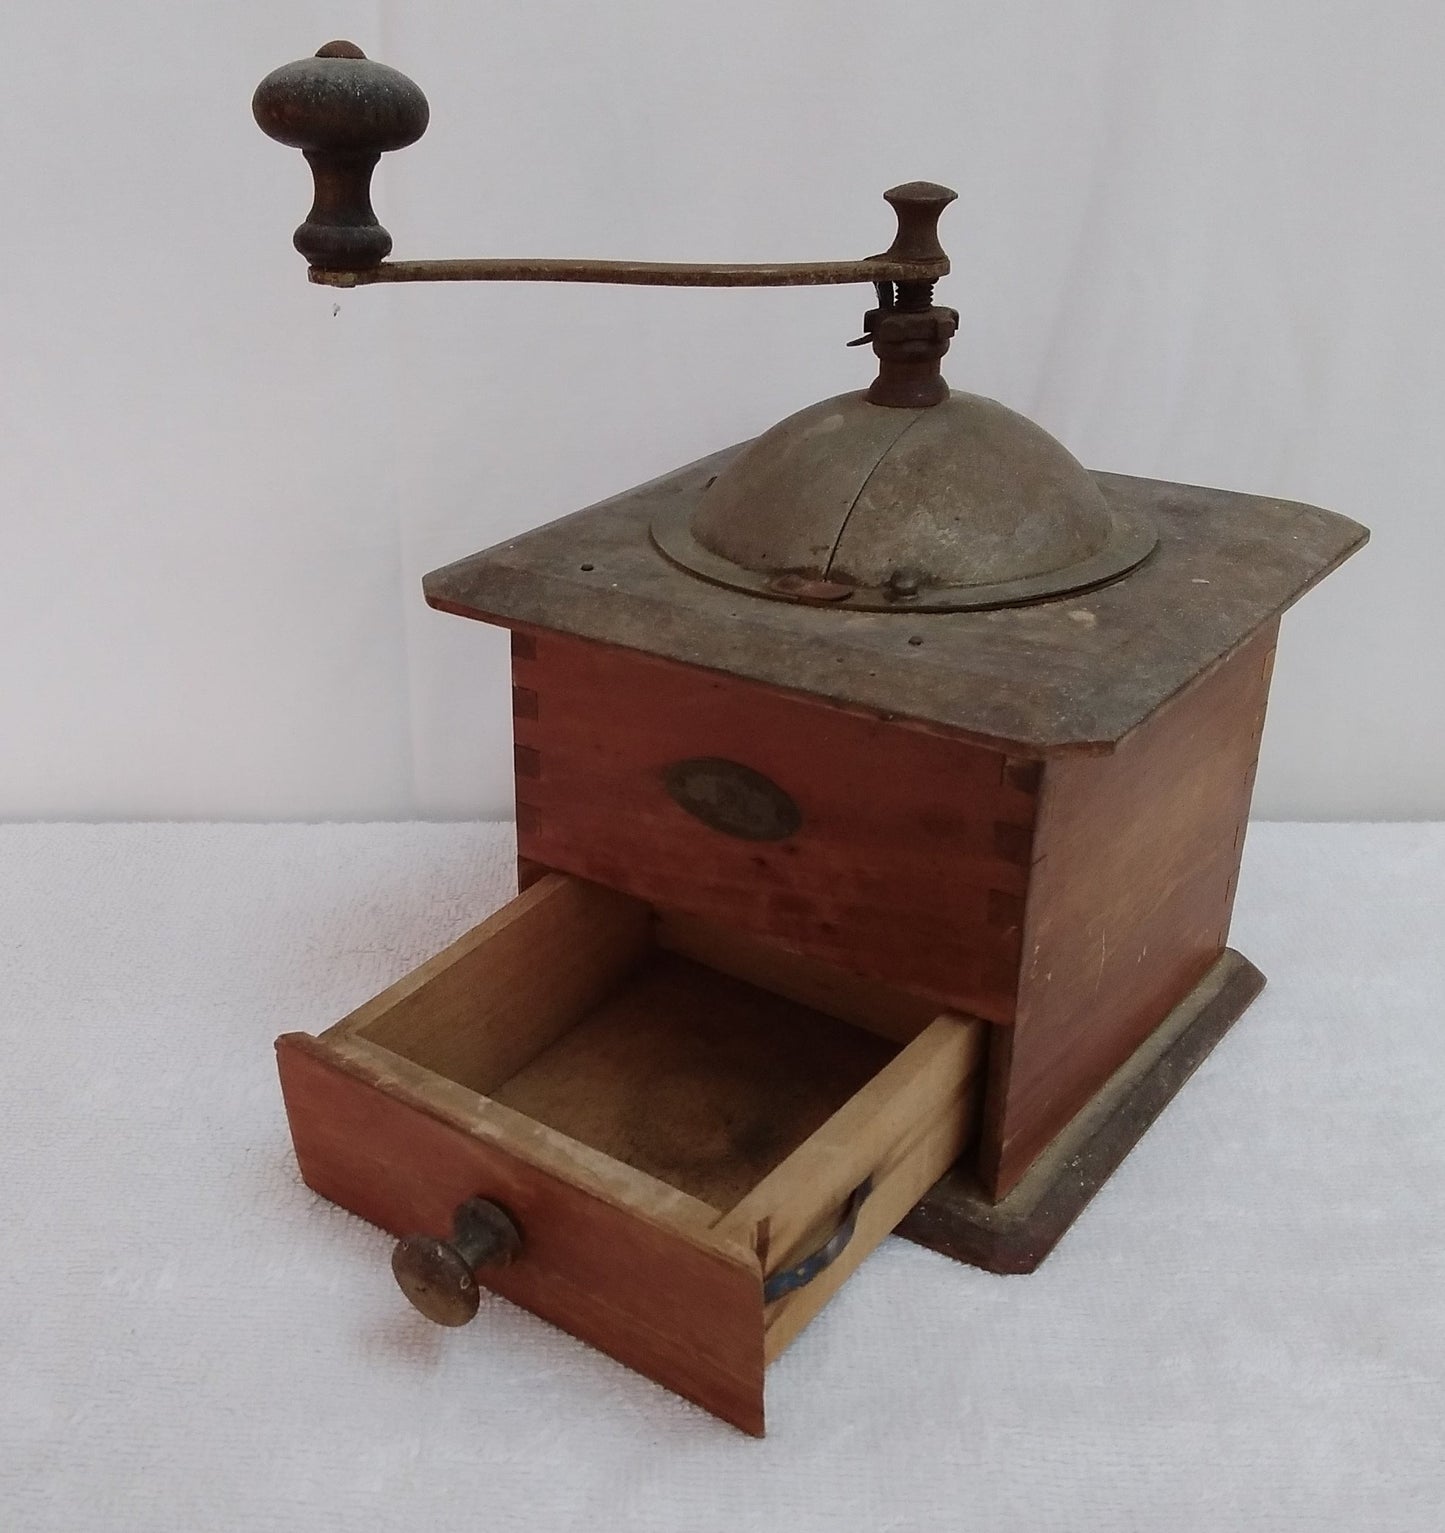 ANTIQUE -- Peugeot Freres Valentigney Coffee Mill -- early 20th c, before 1940